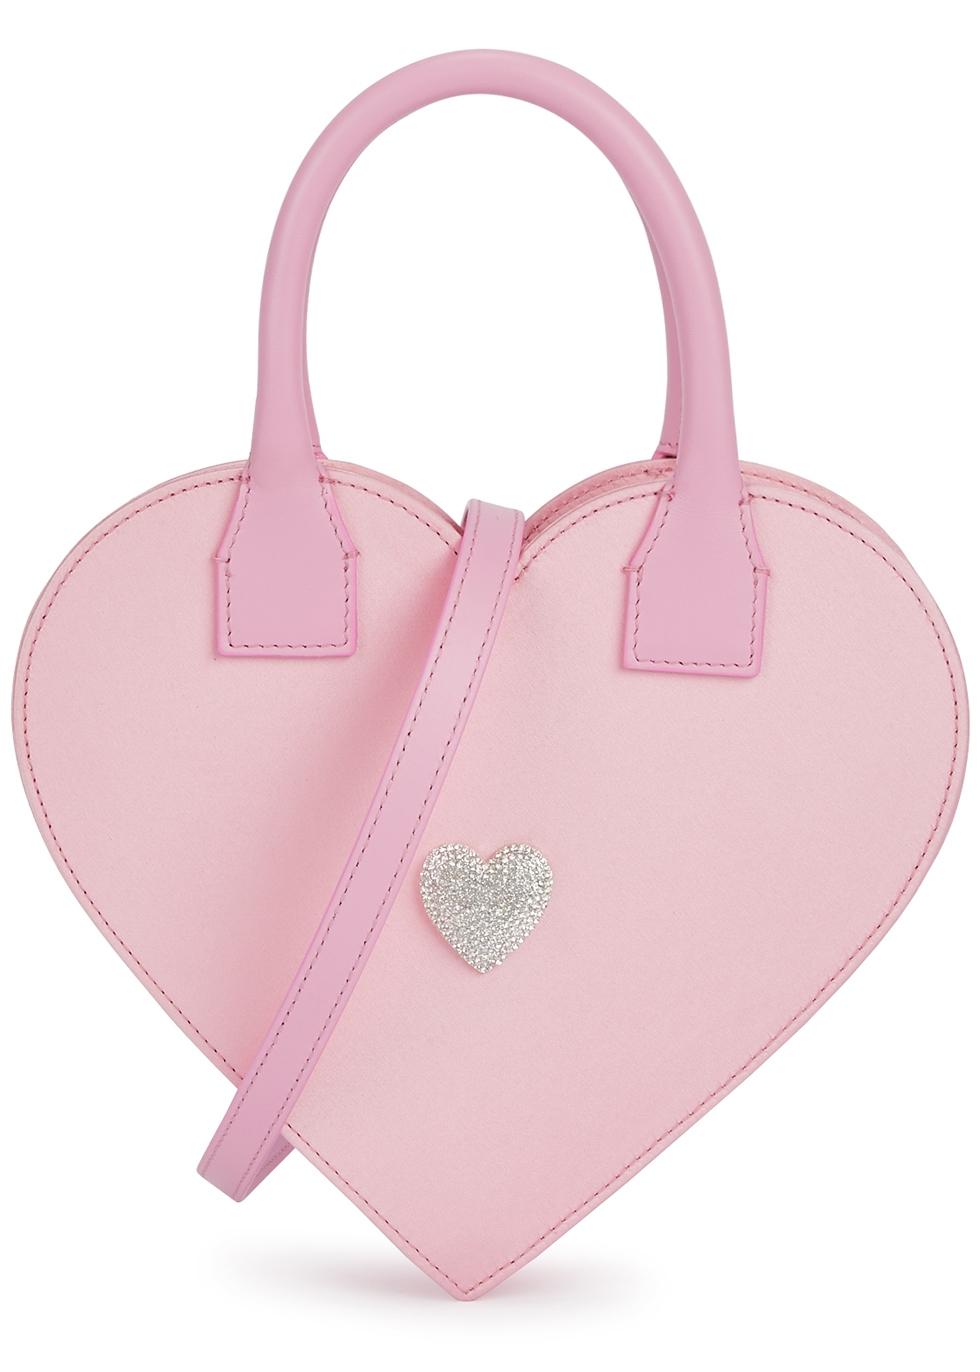 Mach & Mach Heart-shaped Satin Top Handle Bag in Pink | Lyst